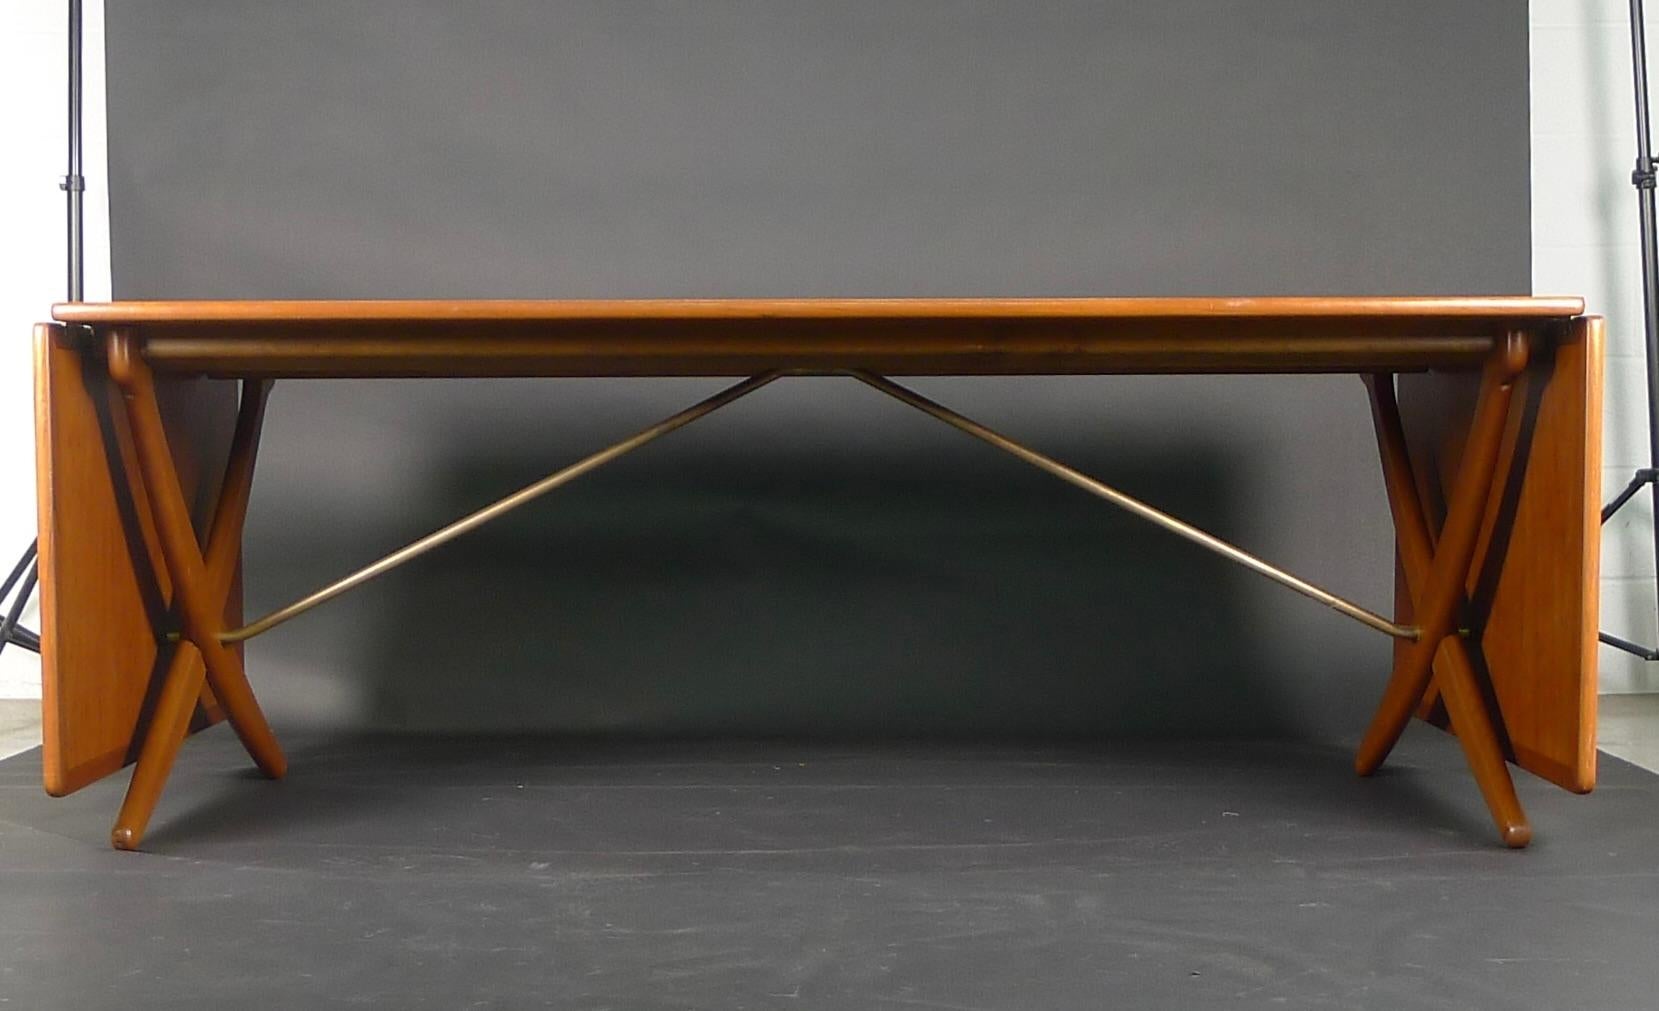 Hans J Wegner, Danish Teak & Oak Drop-Leaf Dining Table by Andreas Tuck, 1950s

Designed by Hans J Wegner in 1950 and manufactured by cabinetmaker Andreas Tuck in Demmark, this is the rare model AT-314 with teak top and two drop leaves, oak sabre